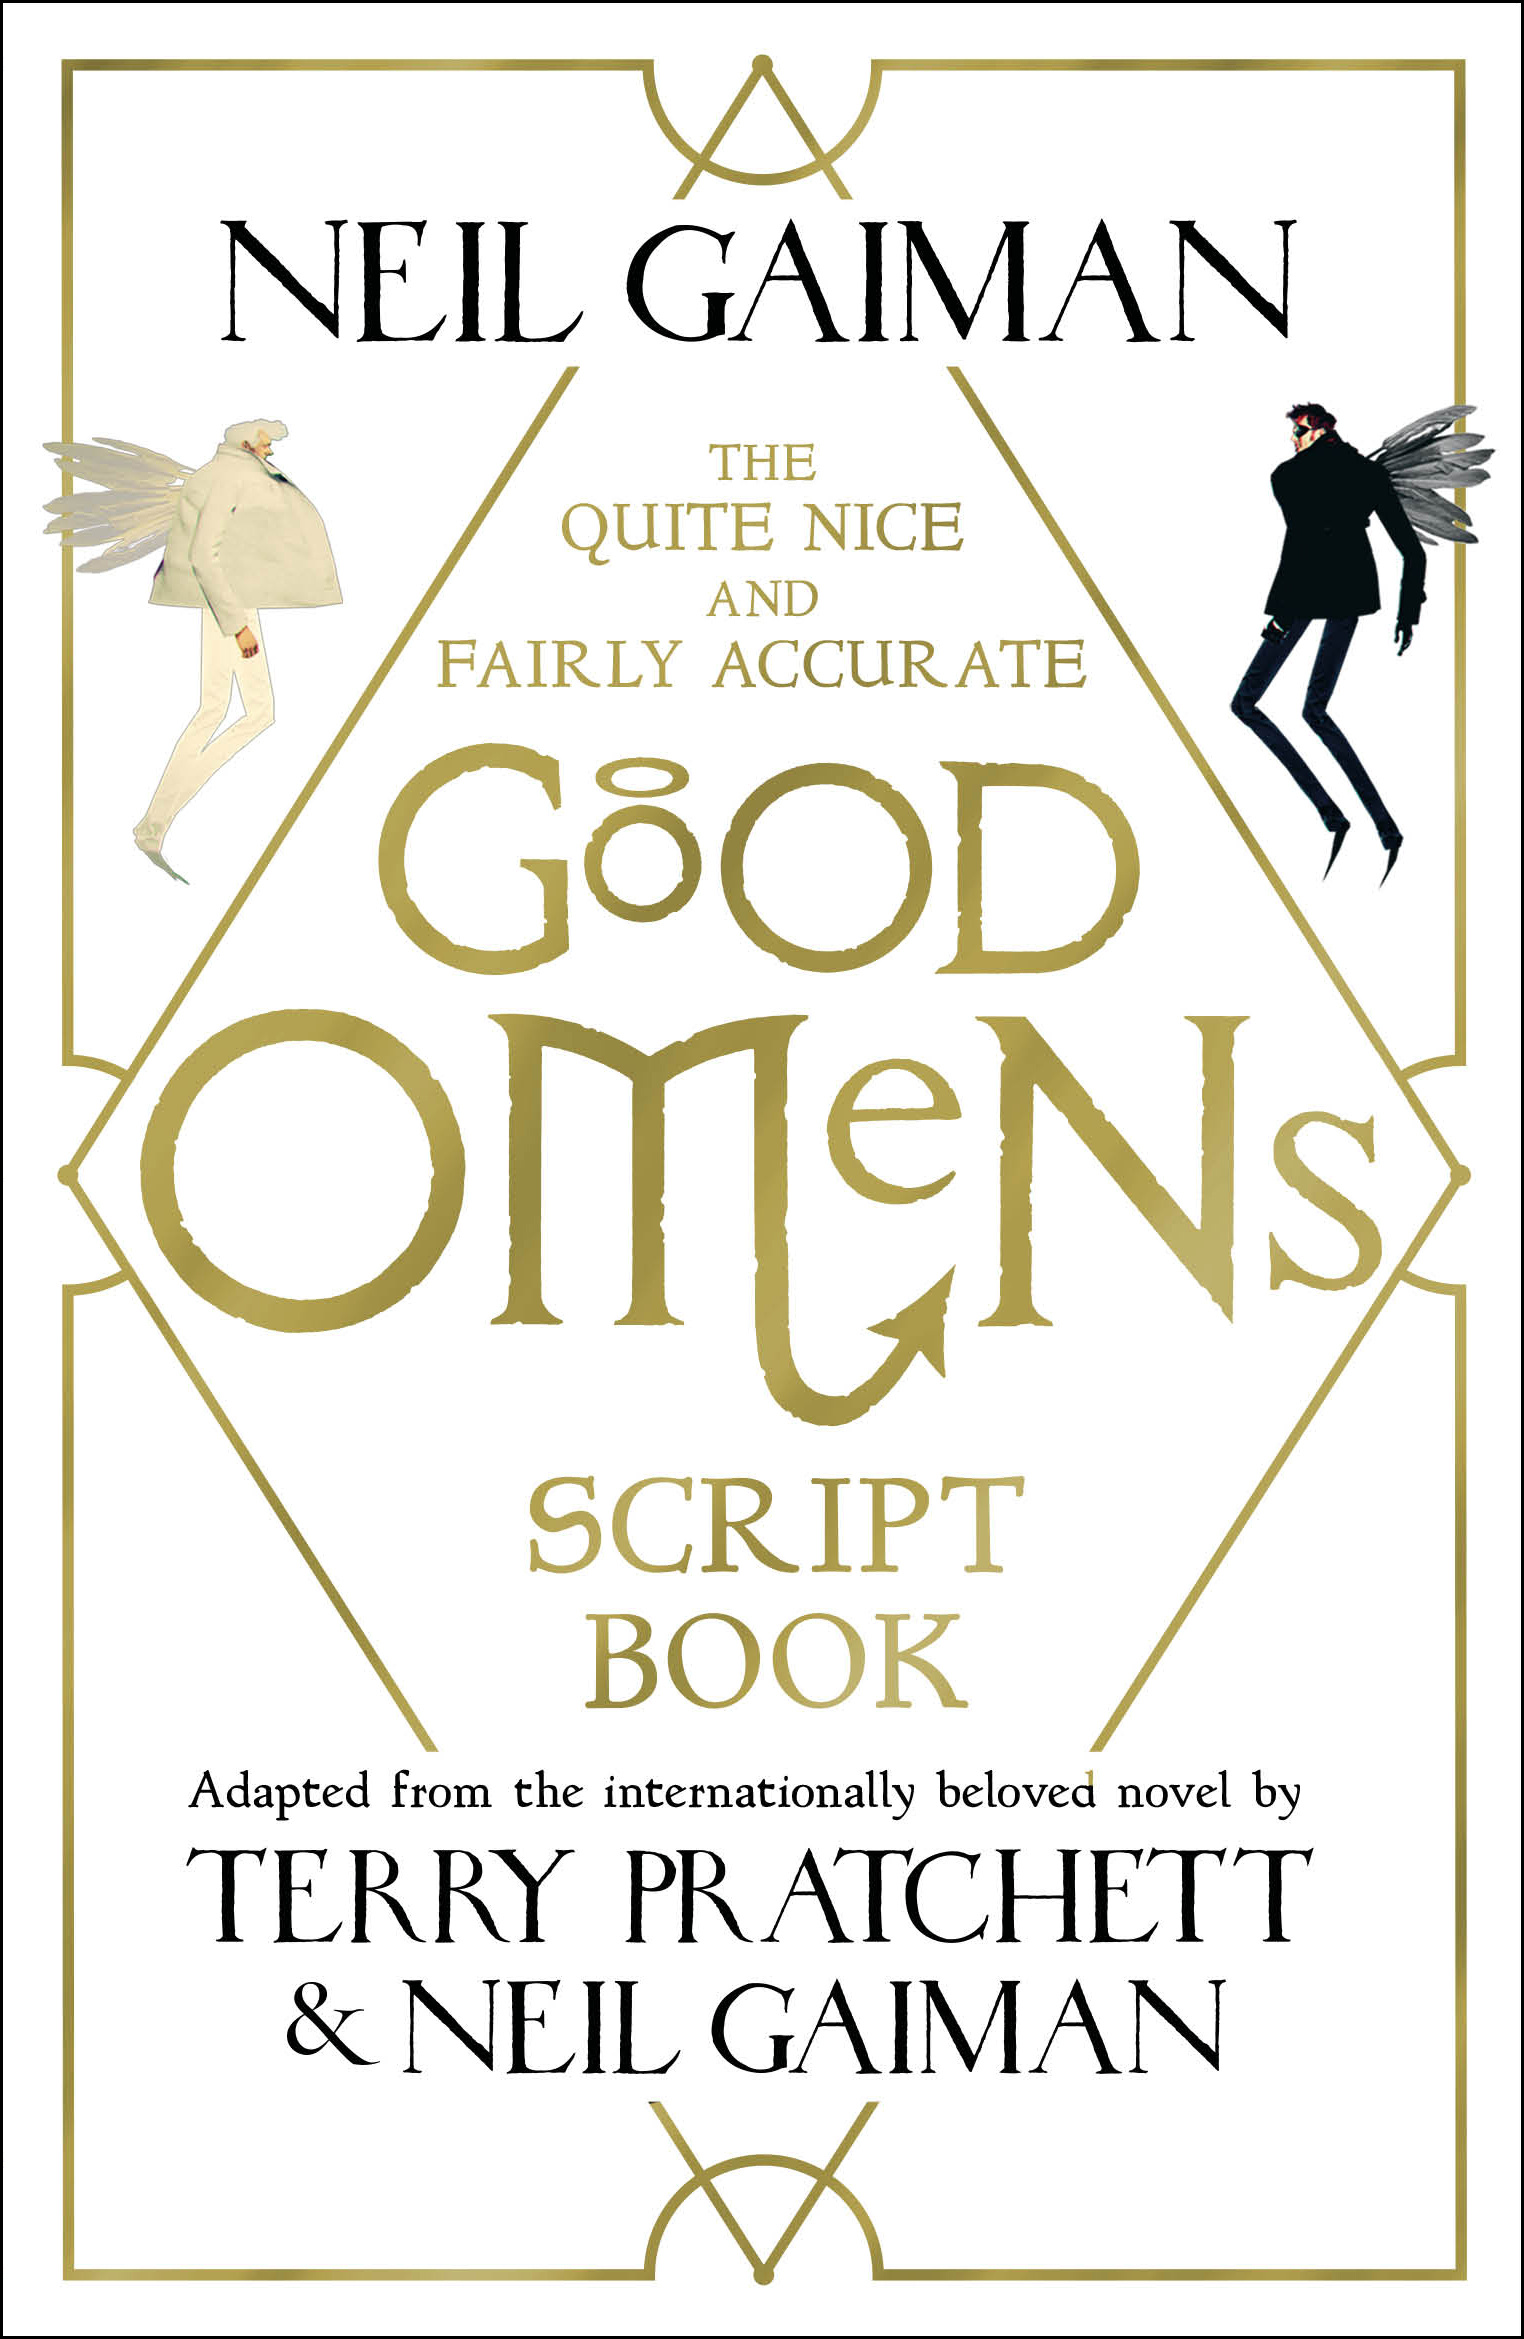 The Quite Nice and Fairly Accurate Good Omens Script Book by Neil